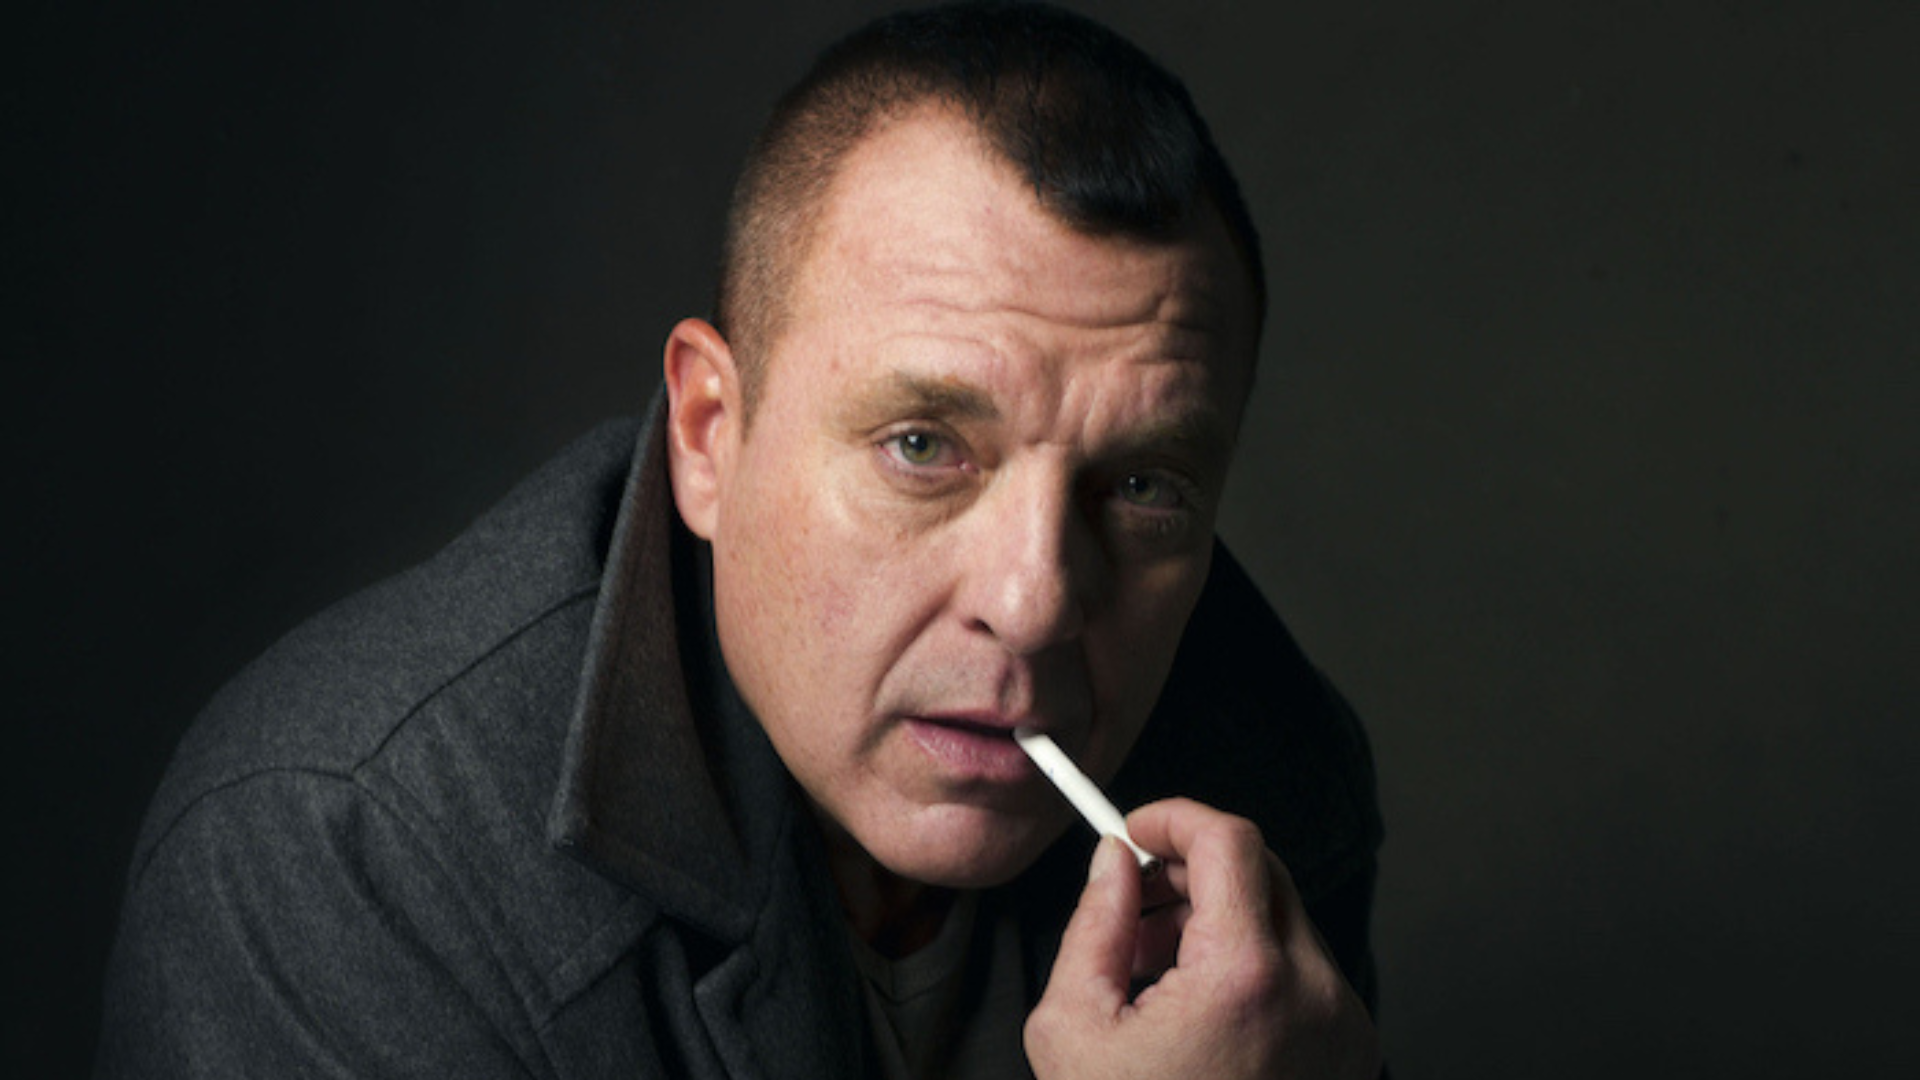 Tom Sizemore wearing black coat with a cigarrete on his mouth